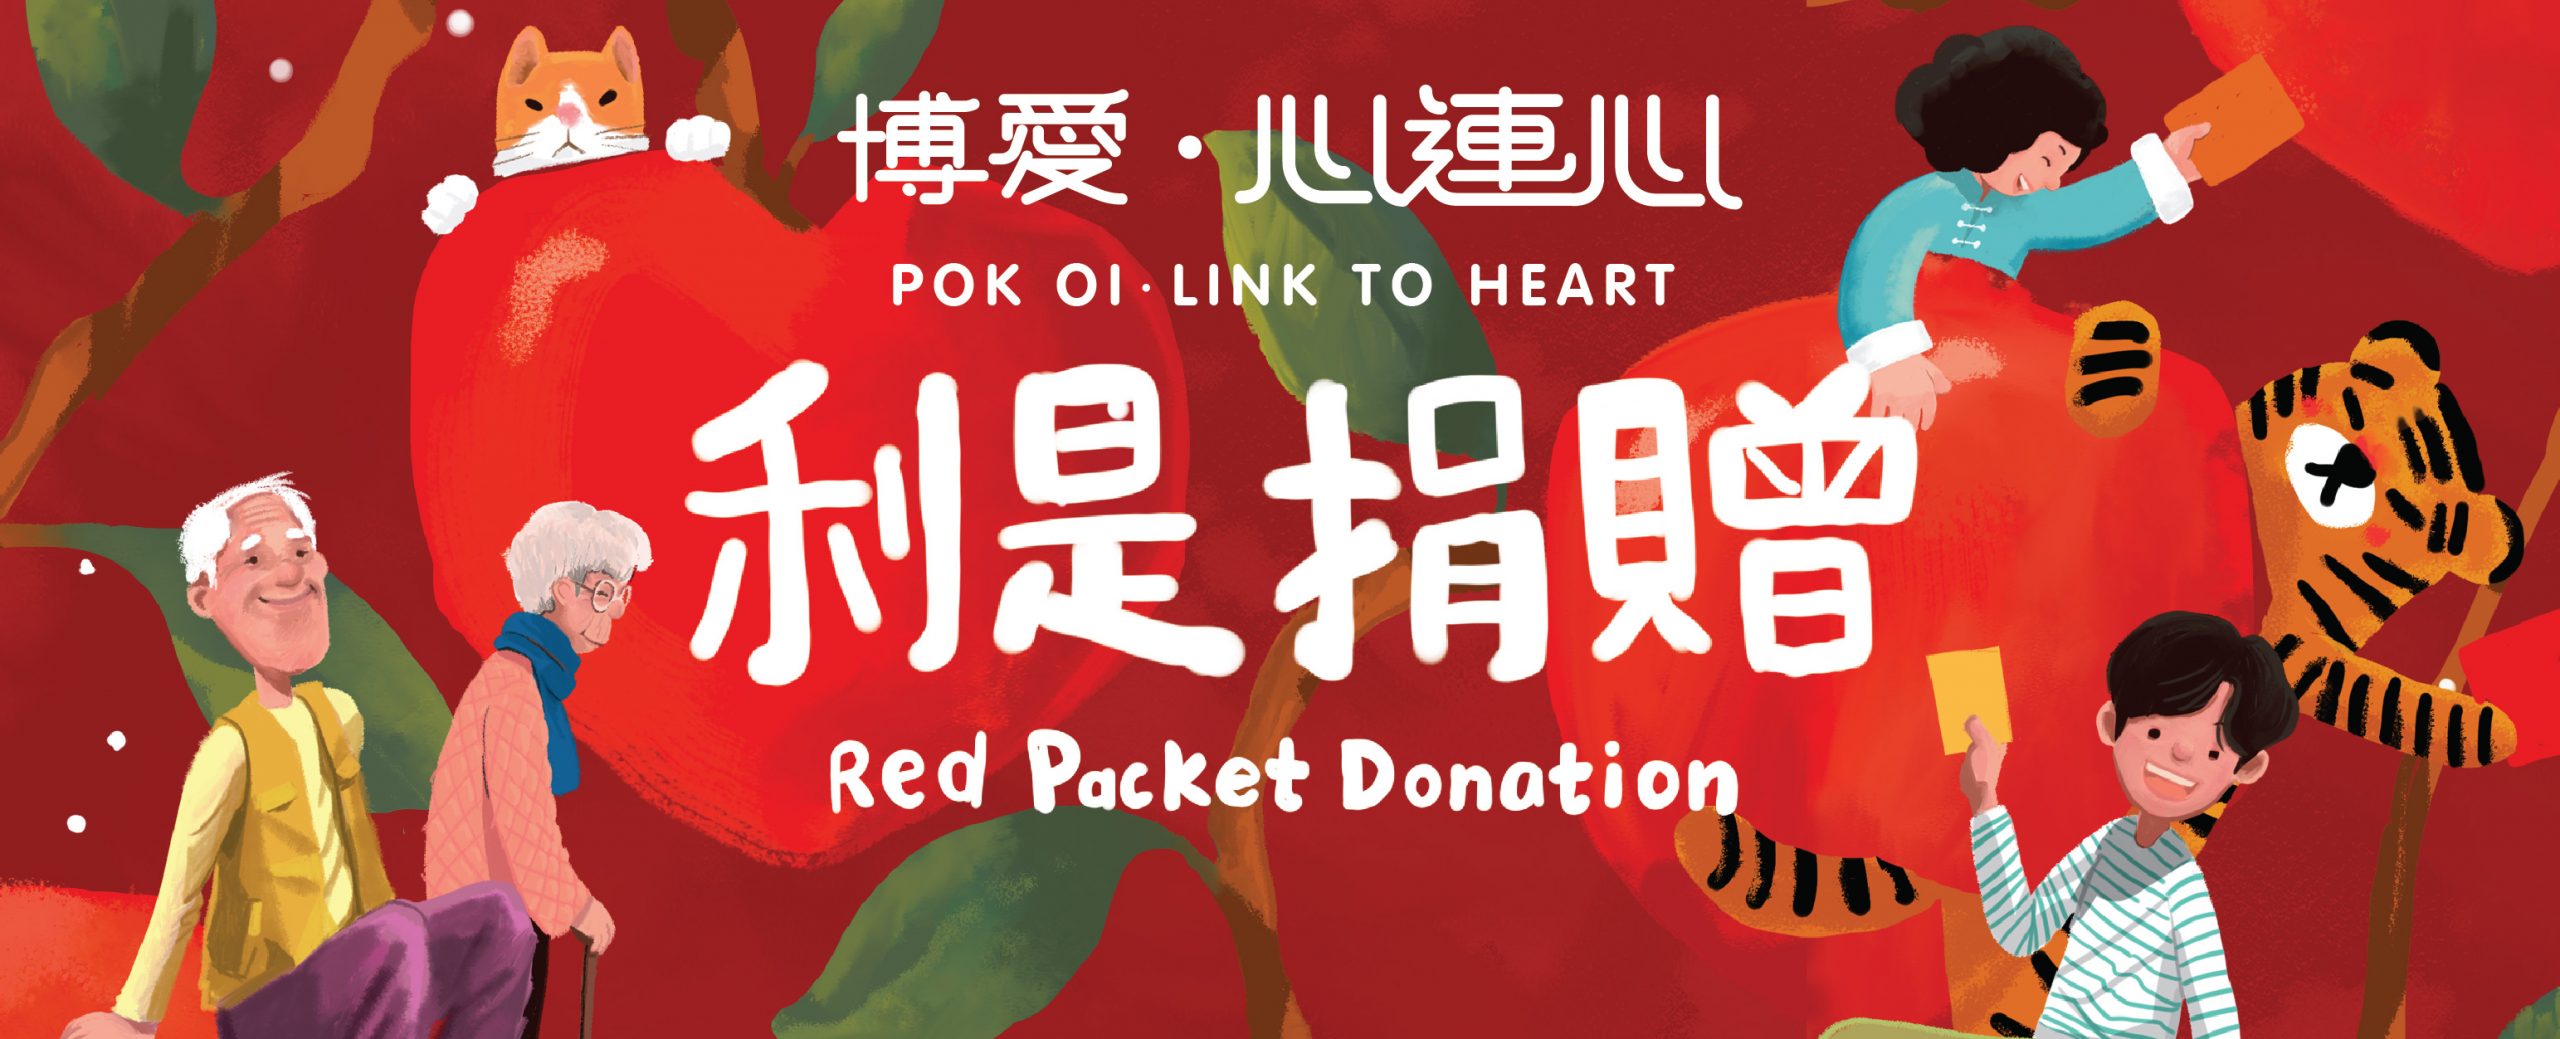 Pok Oi．Link to Heart Red Packet Donation